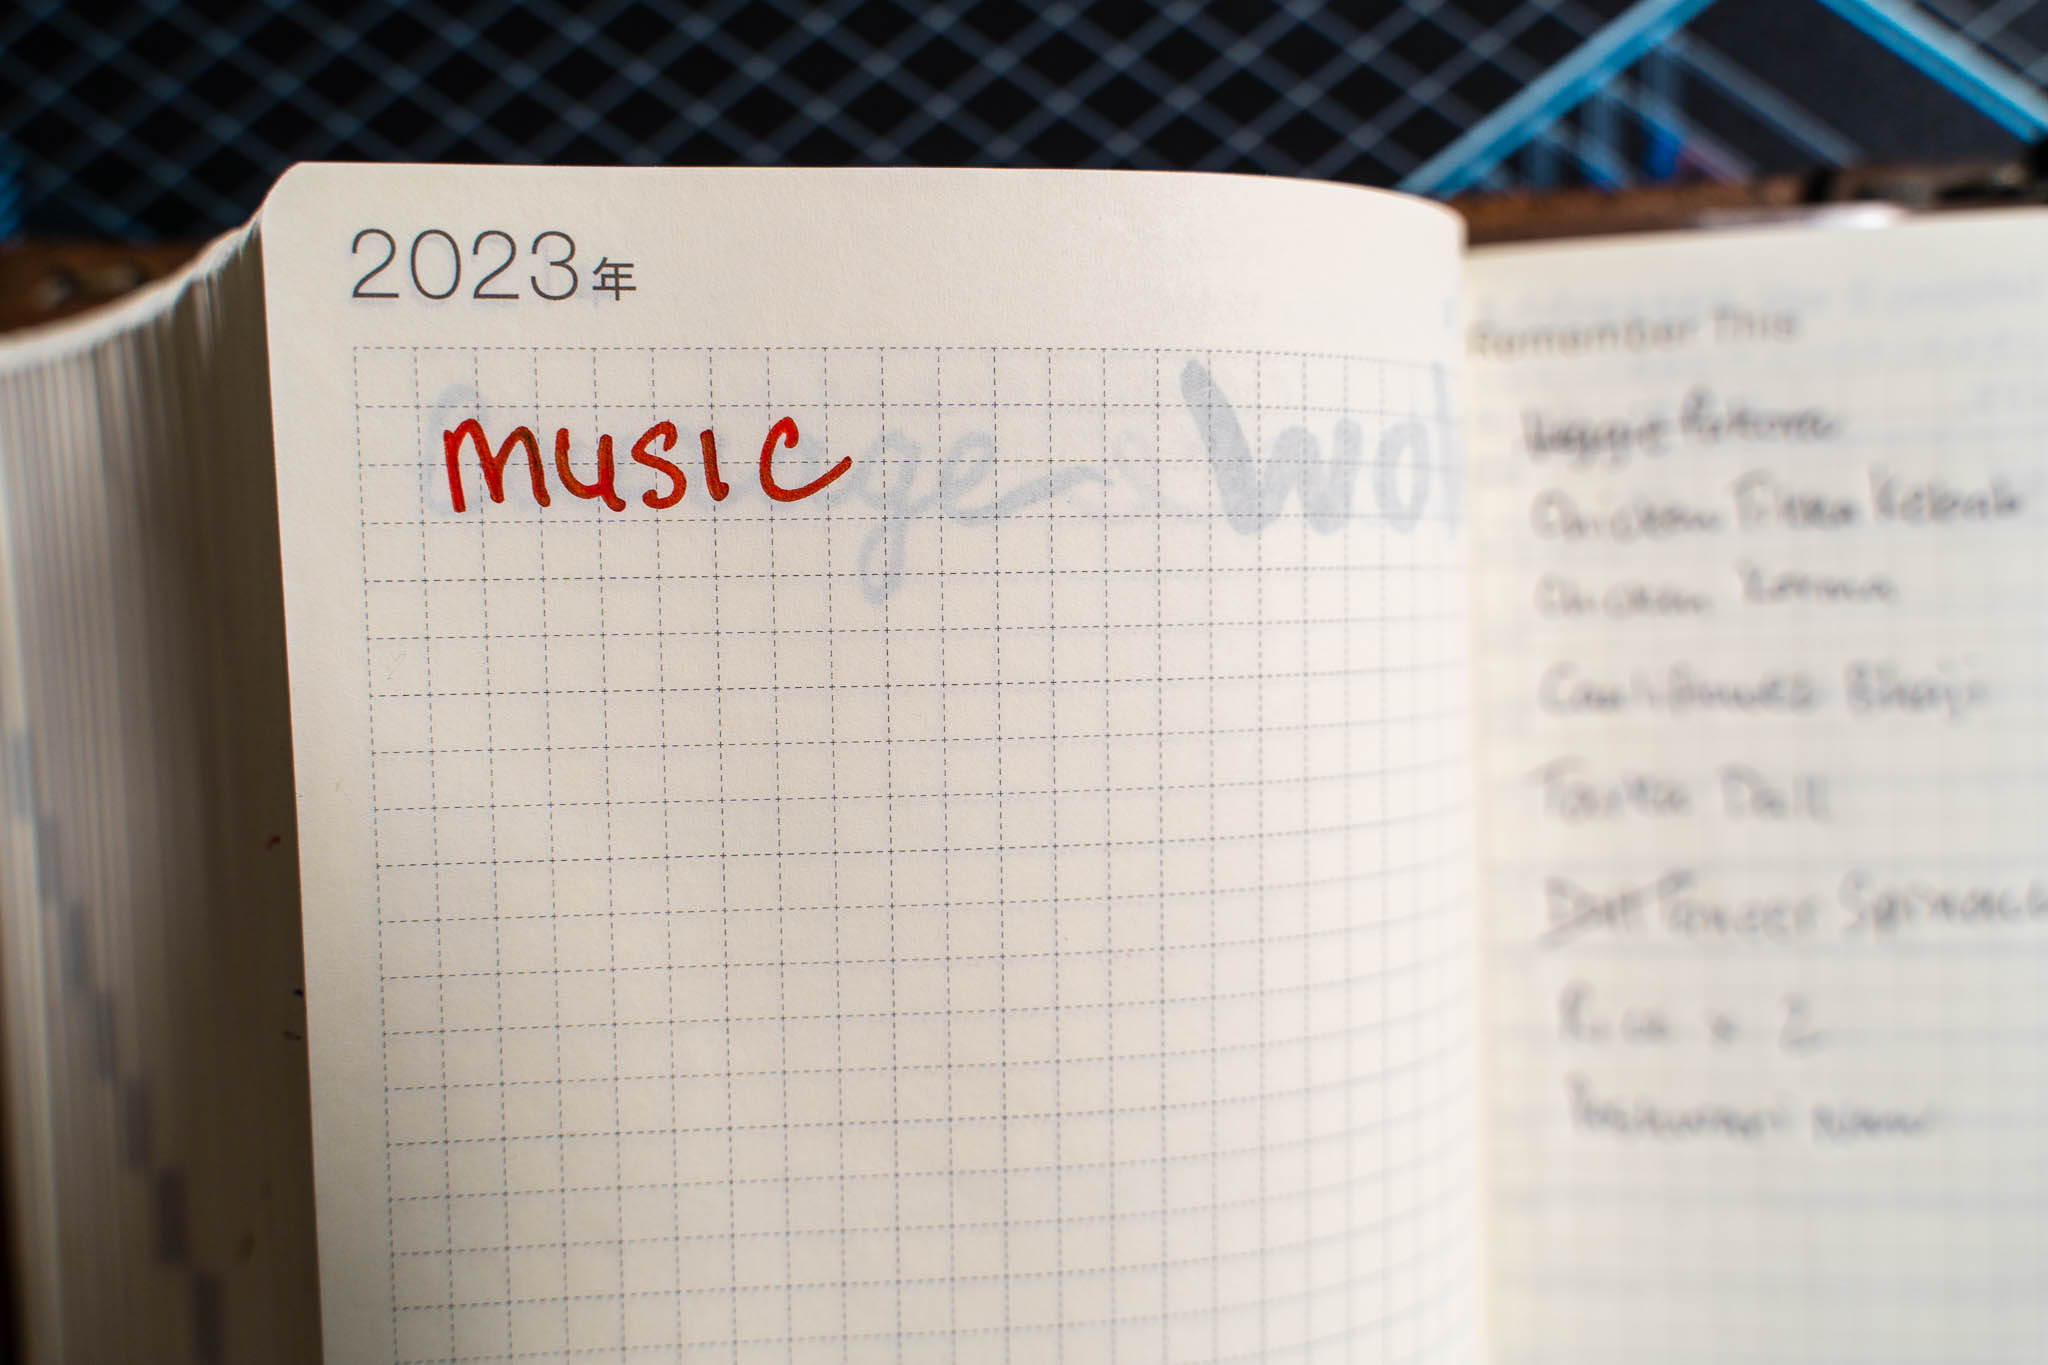 2023 diary page showing a hand-written entry simply reading "Music" in red fountain pen ink. 